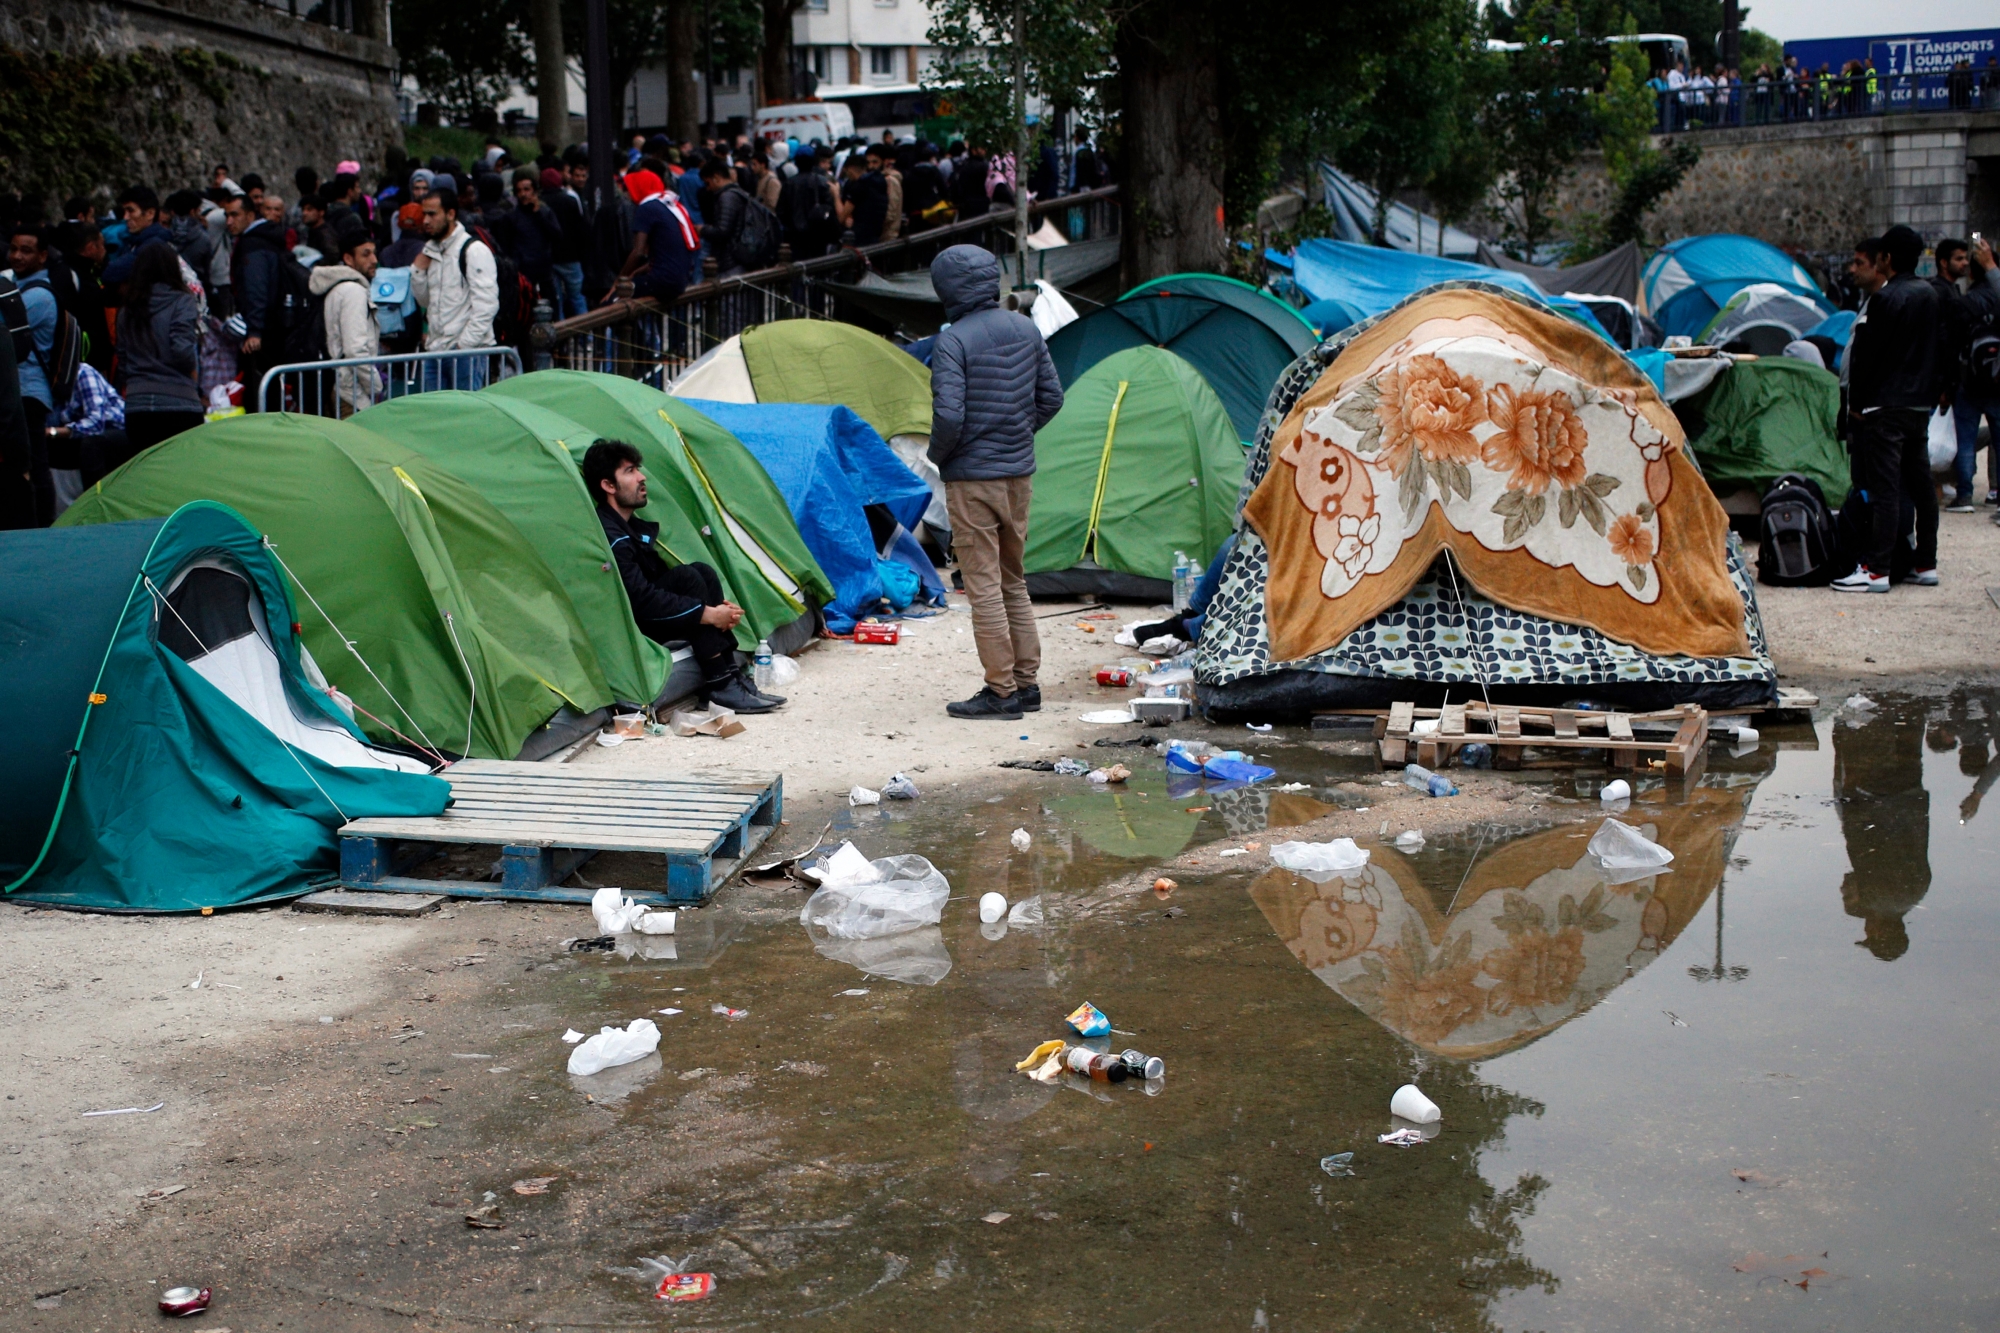 Migrants wait to leave during a clearing out of a makeshift migrant camp along side of the canal Saint Martin, in central Paris, France, Monday, June 4, 2018. French police have evacuated around 500 migrants, mostly Afghans but some Africans from a makeshift tent encampment. (AP Photo/Francois Mori) France Migrants